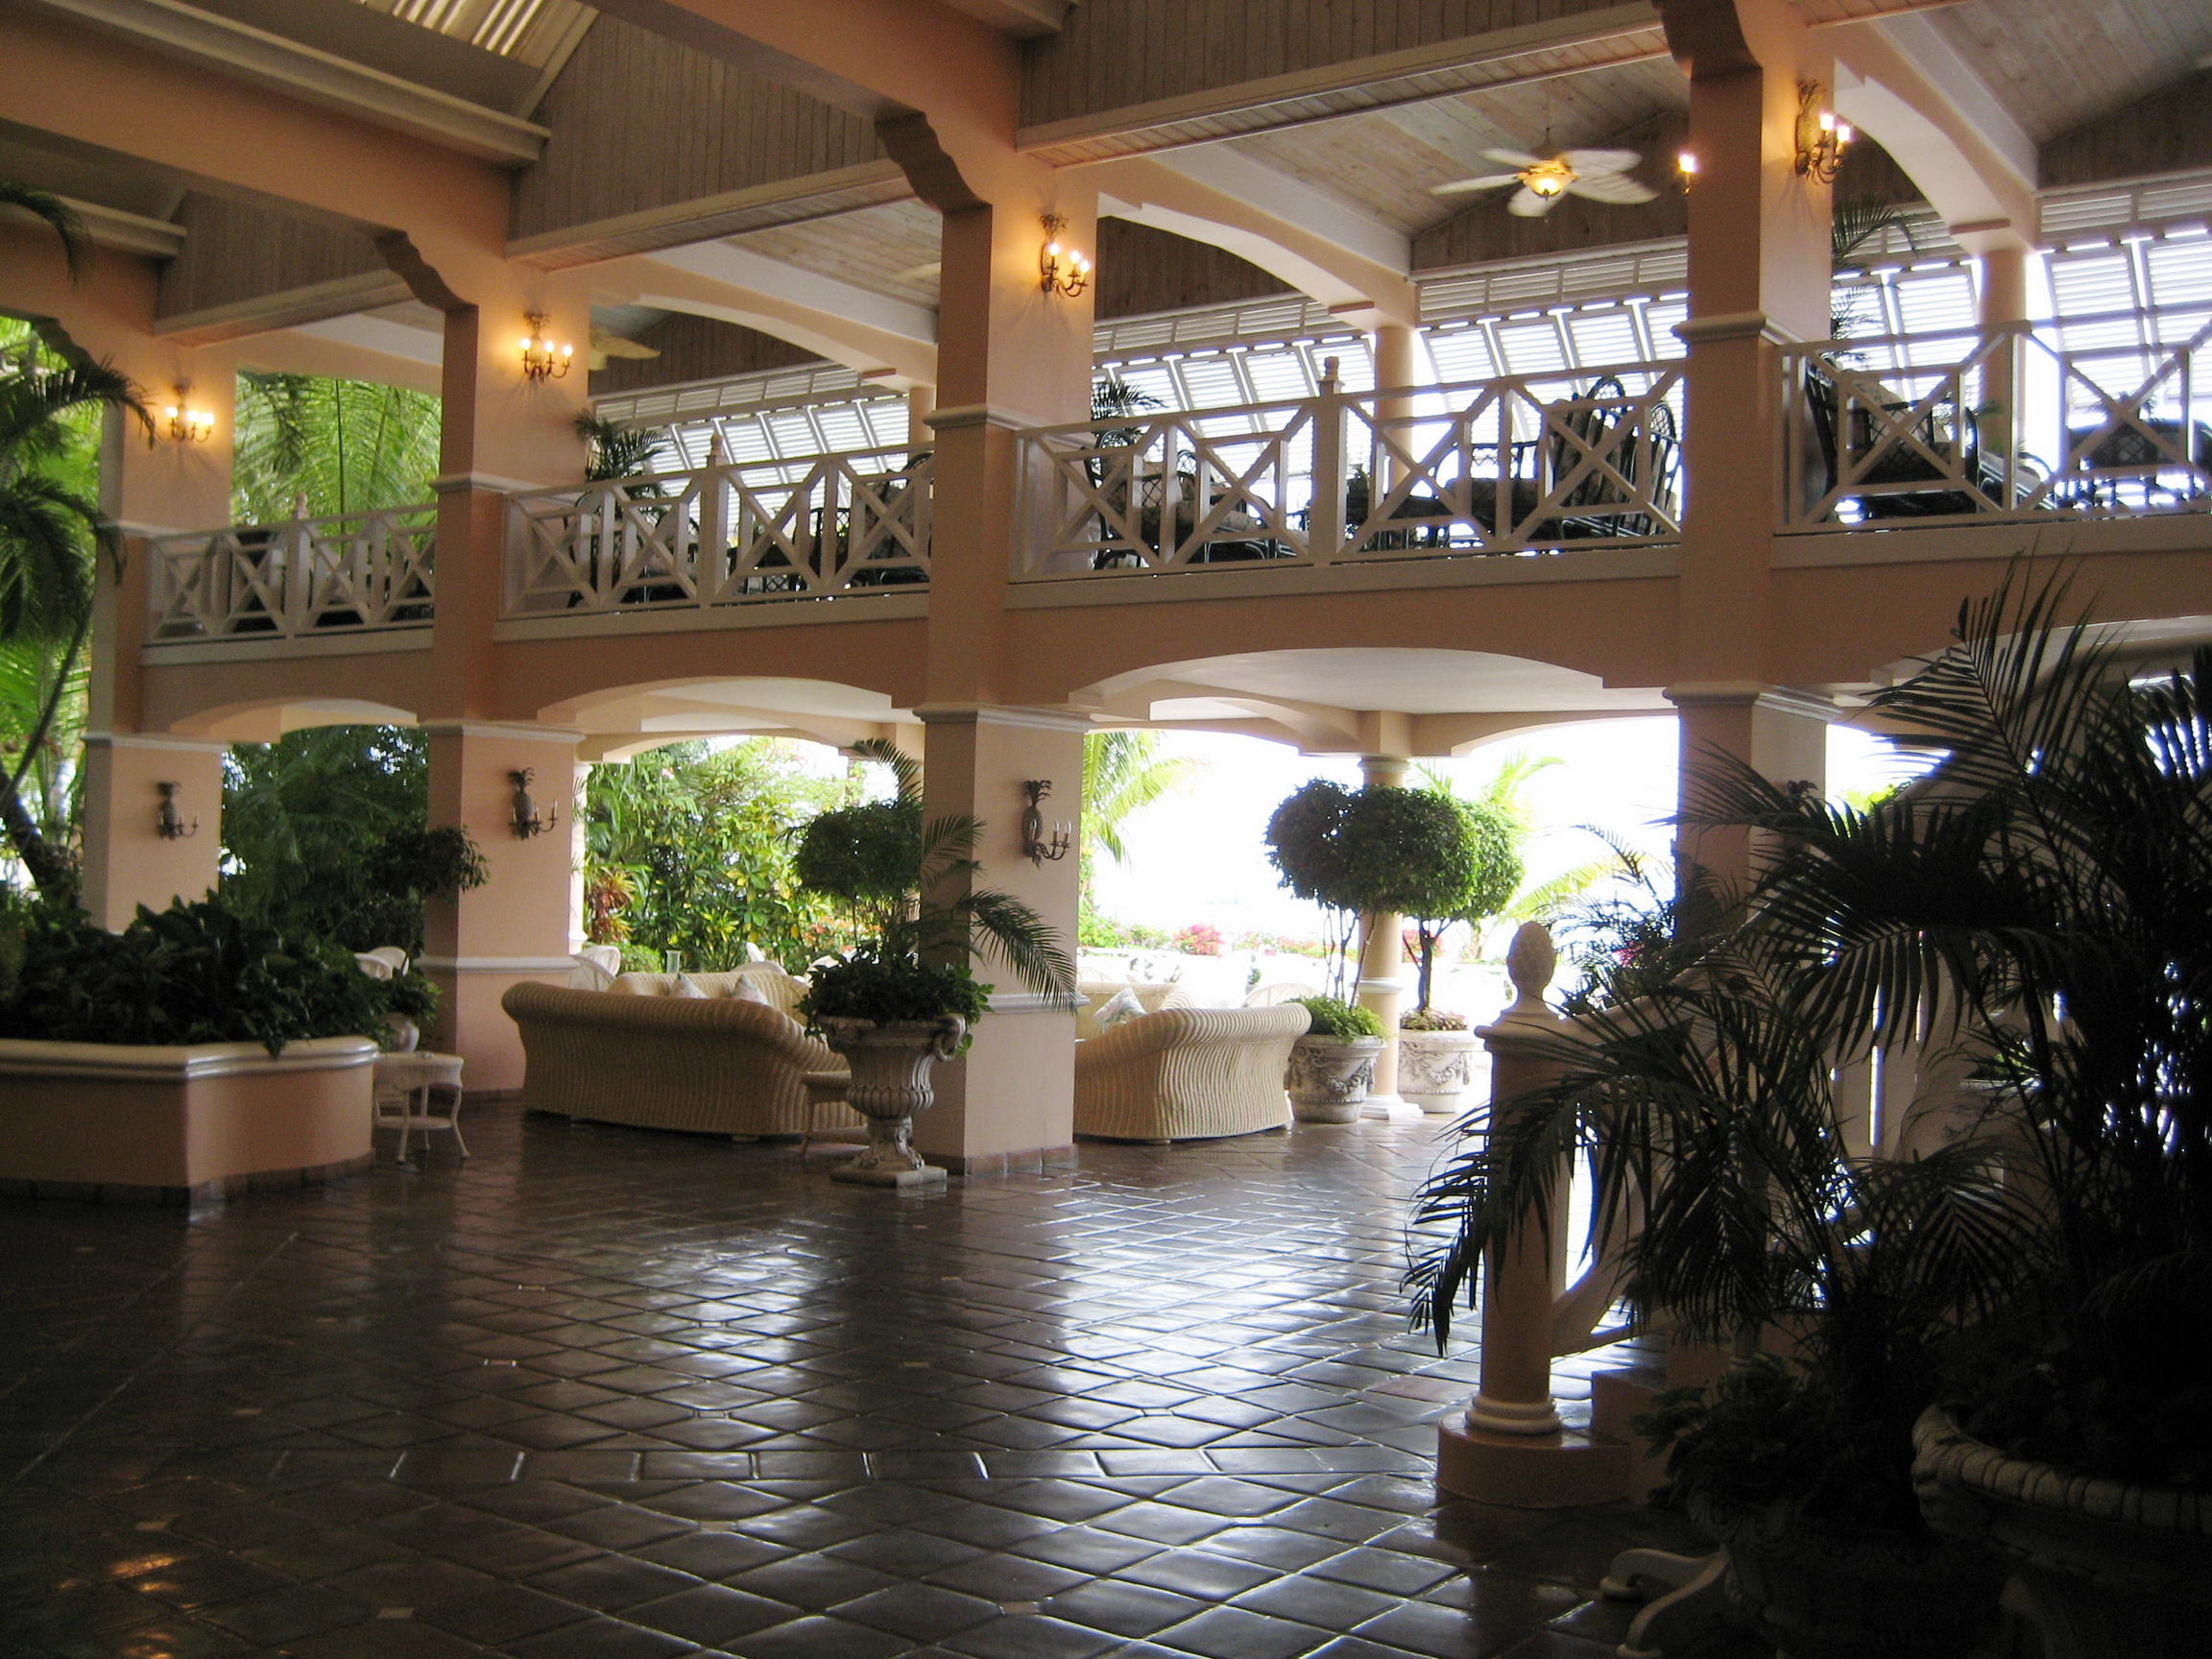 Inside the Coco Reef Resort